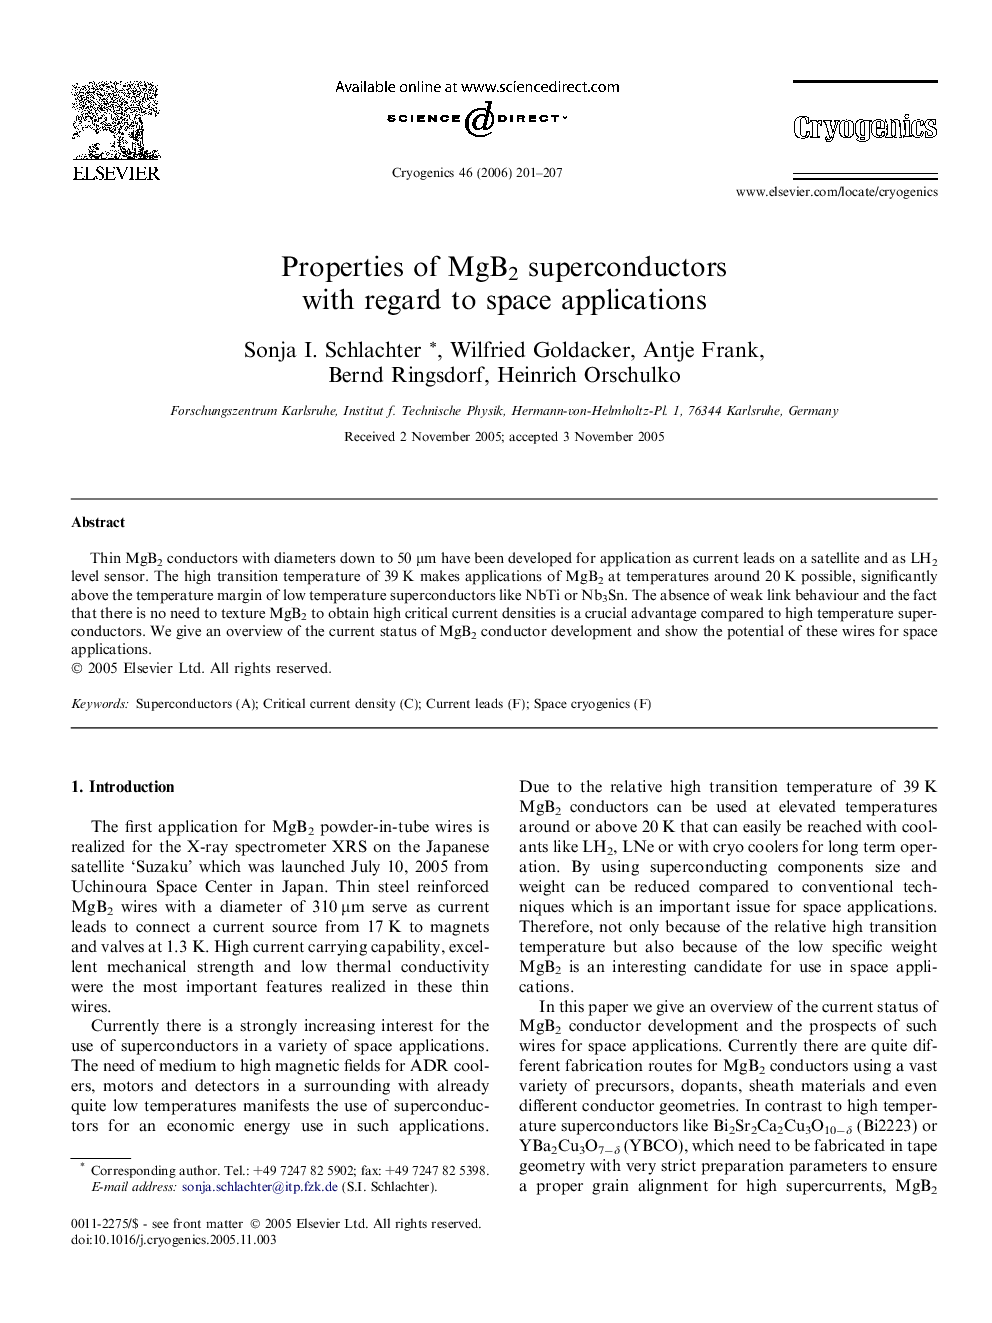 Properties of MgB2 superconductors with regard to space applications